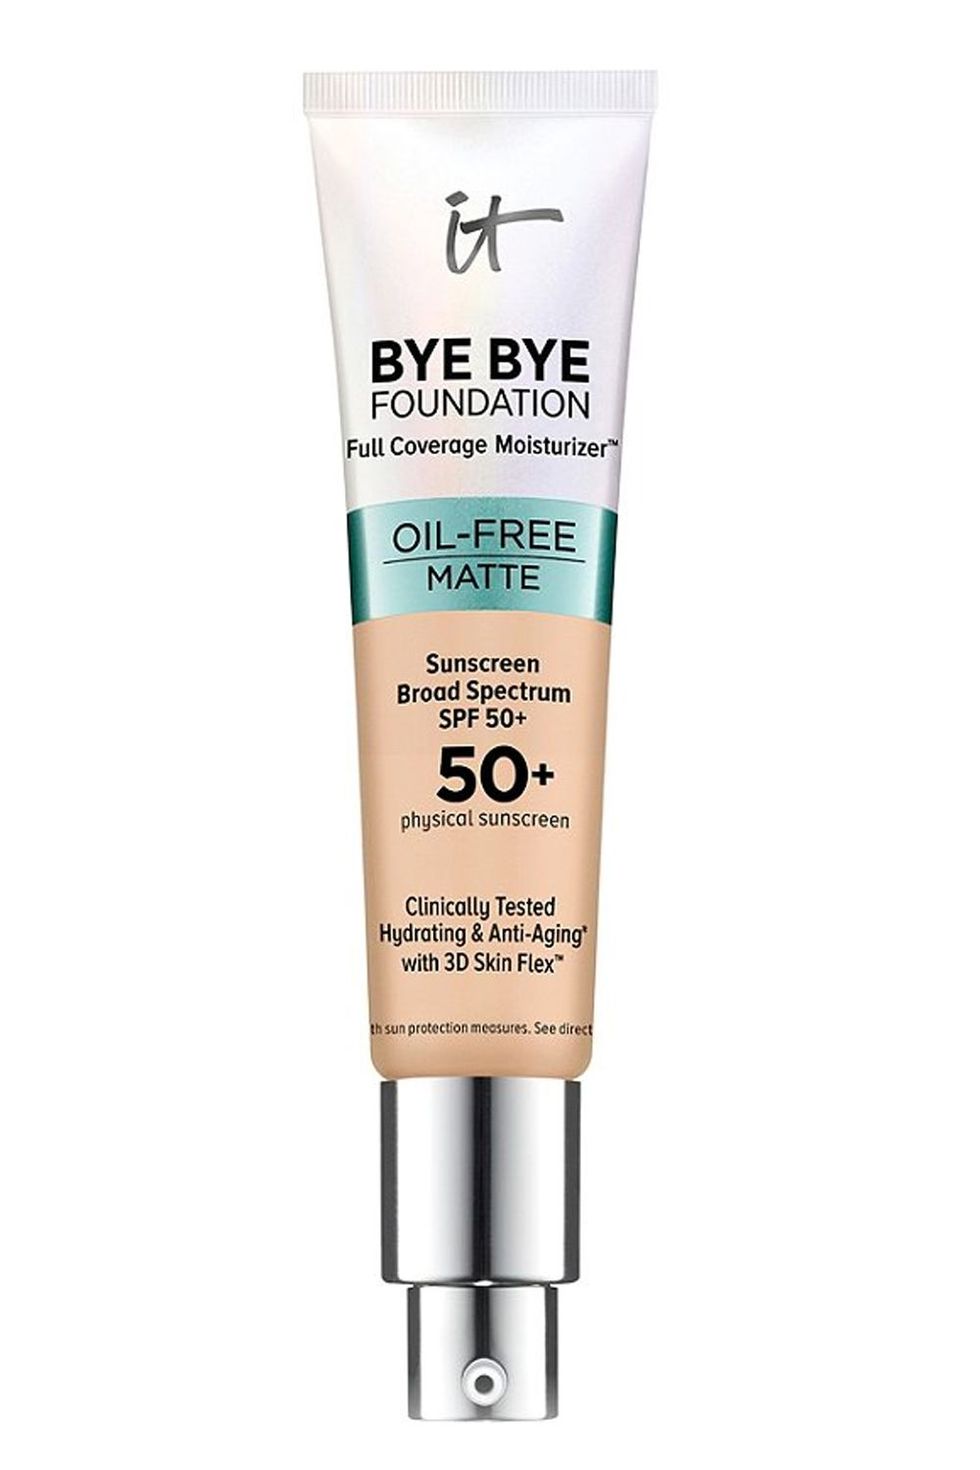 It Cosmetics Bye Bye Foundation Oil-Free Matte Full Coverage Moisturizer with SPF 50+